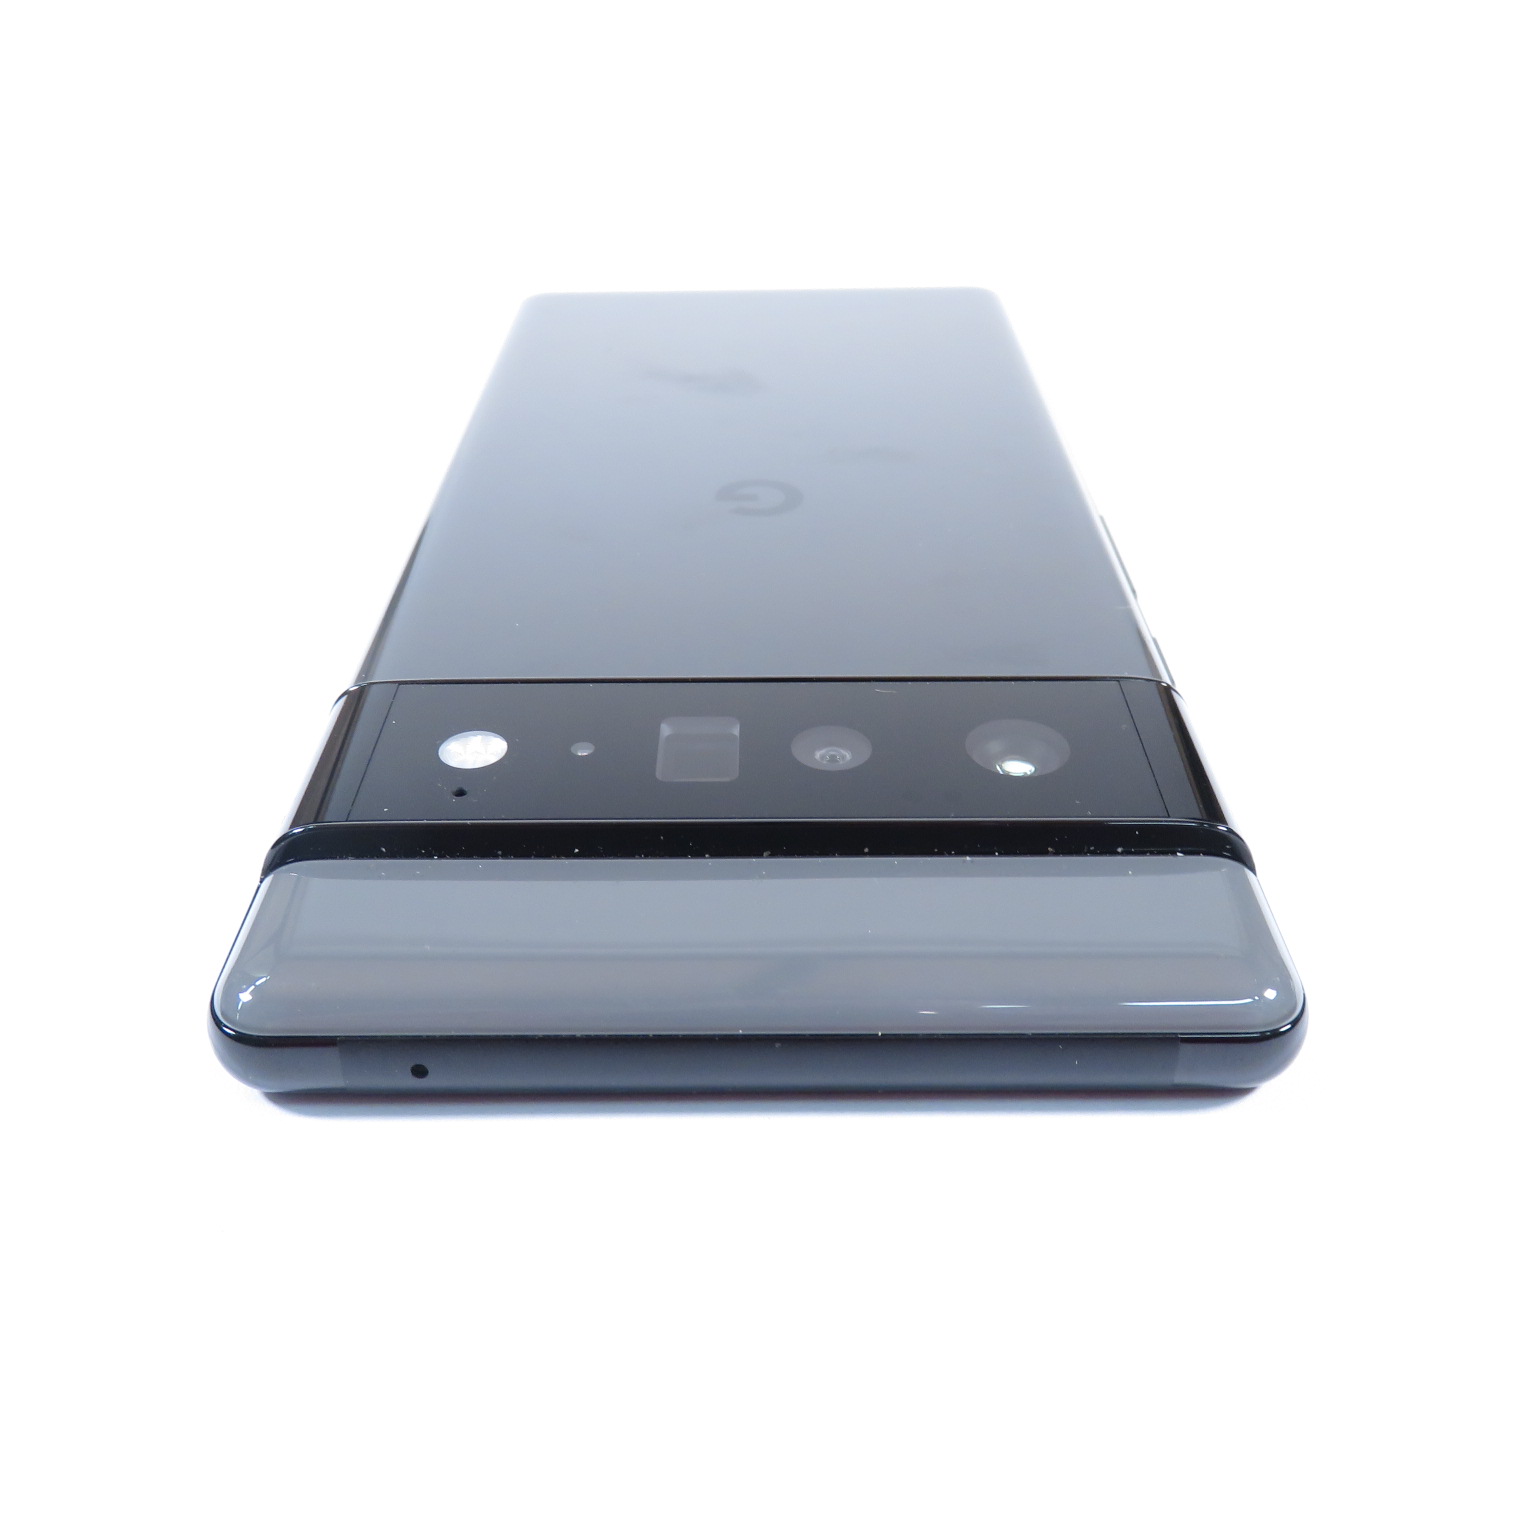 Google Pixel 6 Pro - 5G Android Phone - Unlocked Smartphone with